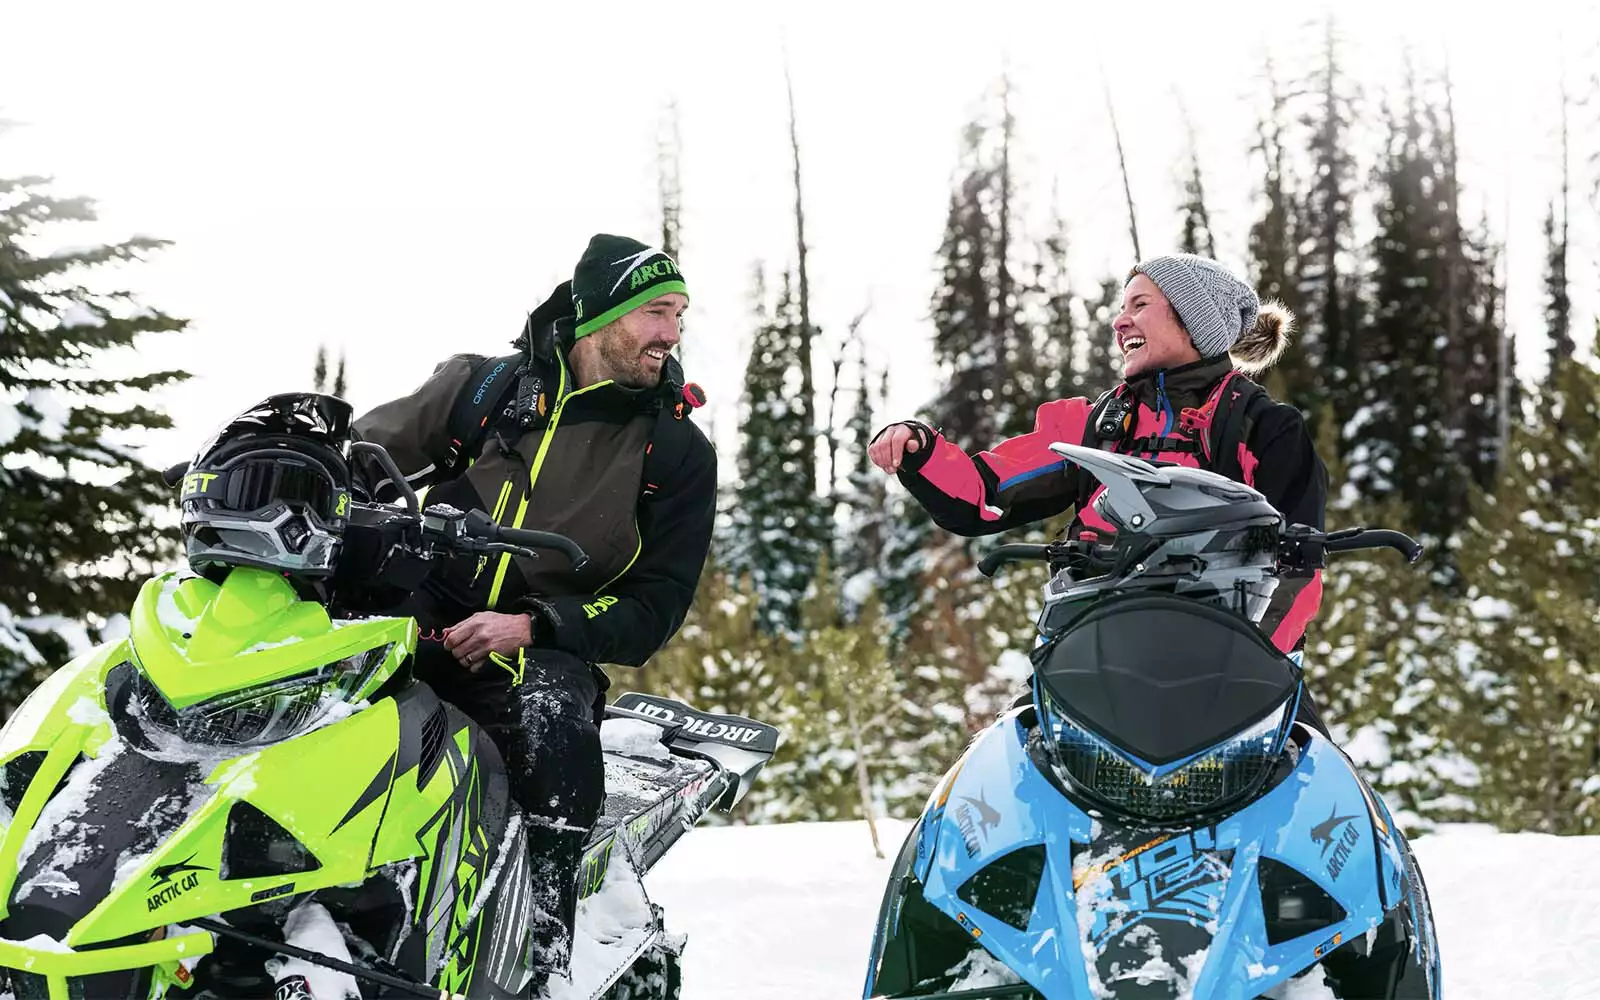 Arctic Cat Issues Recall Notice for 16,000 Snowmobiles Due to Potential Laceration